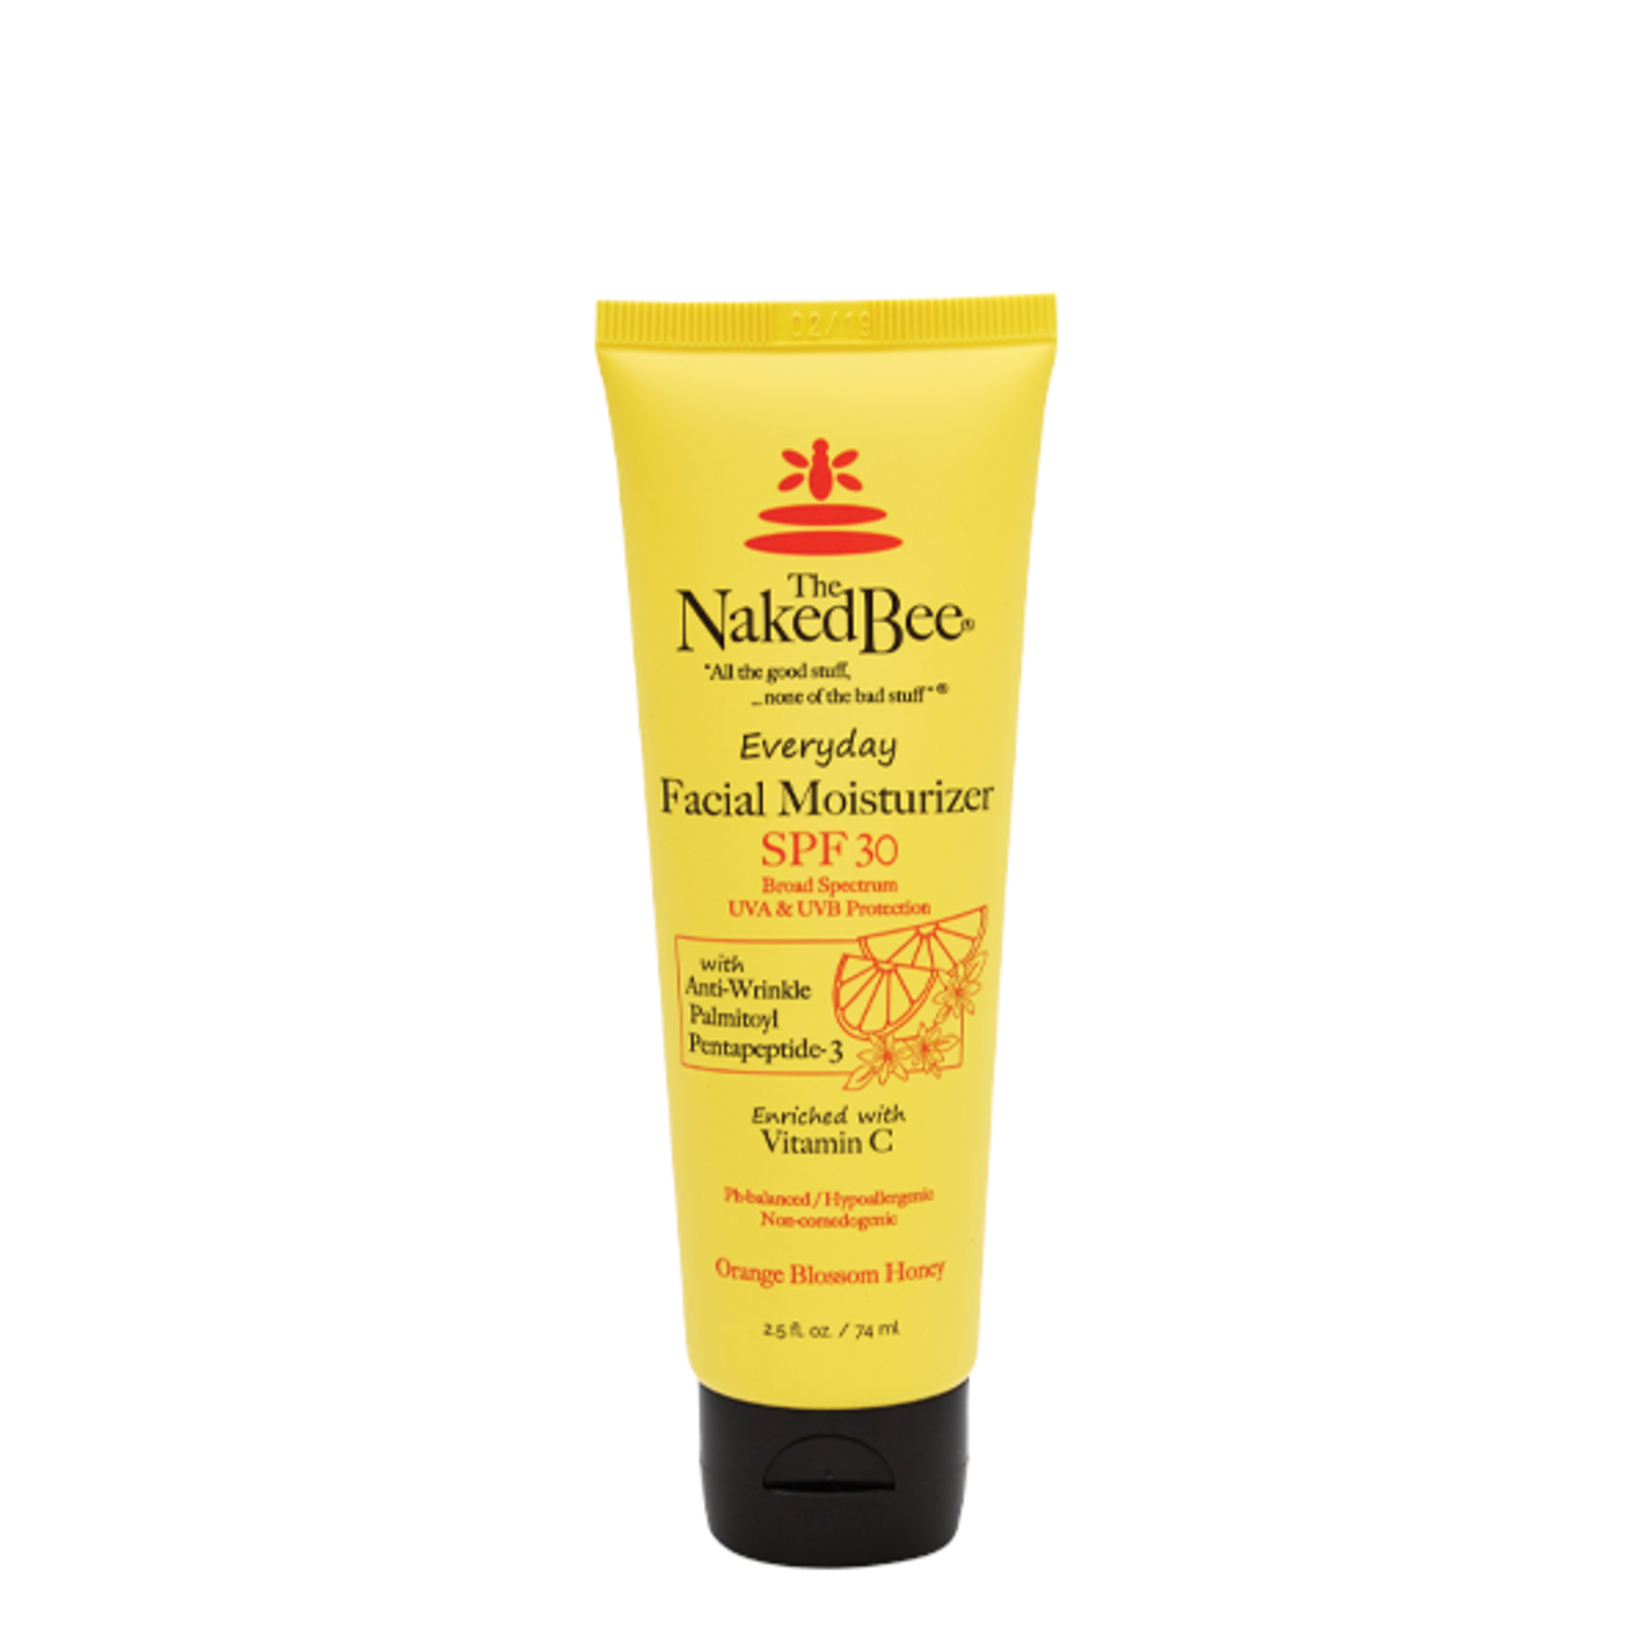 The Naked Bee Daily Facial Moisturizer